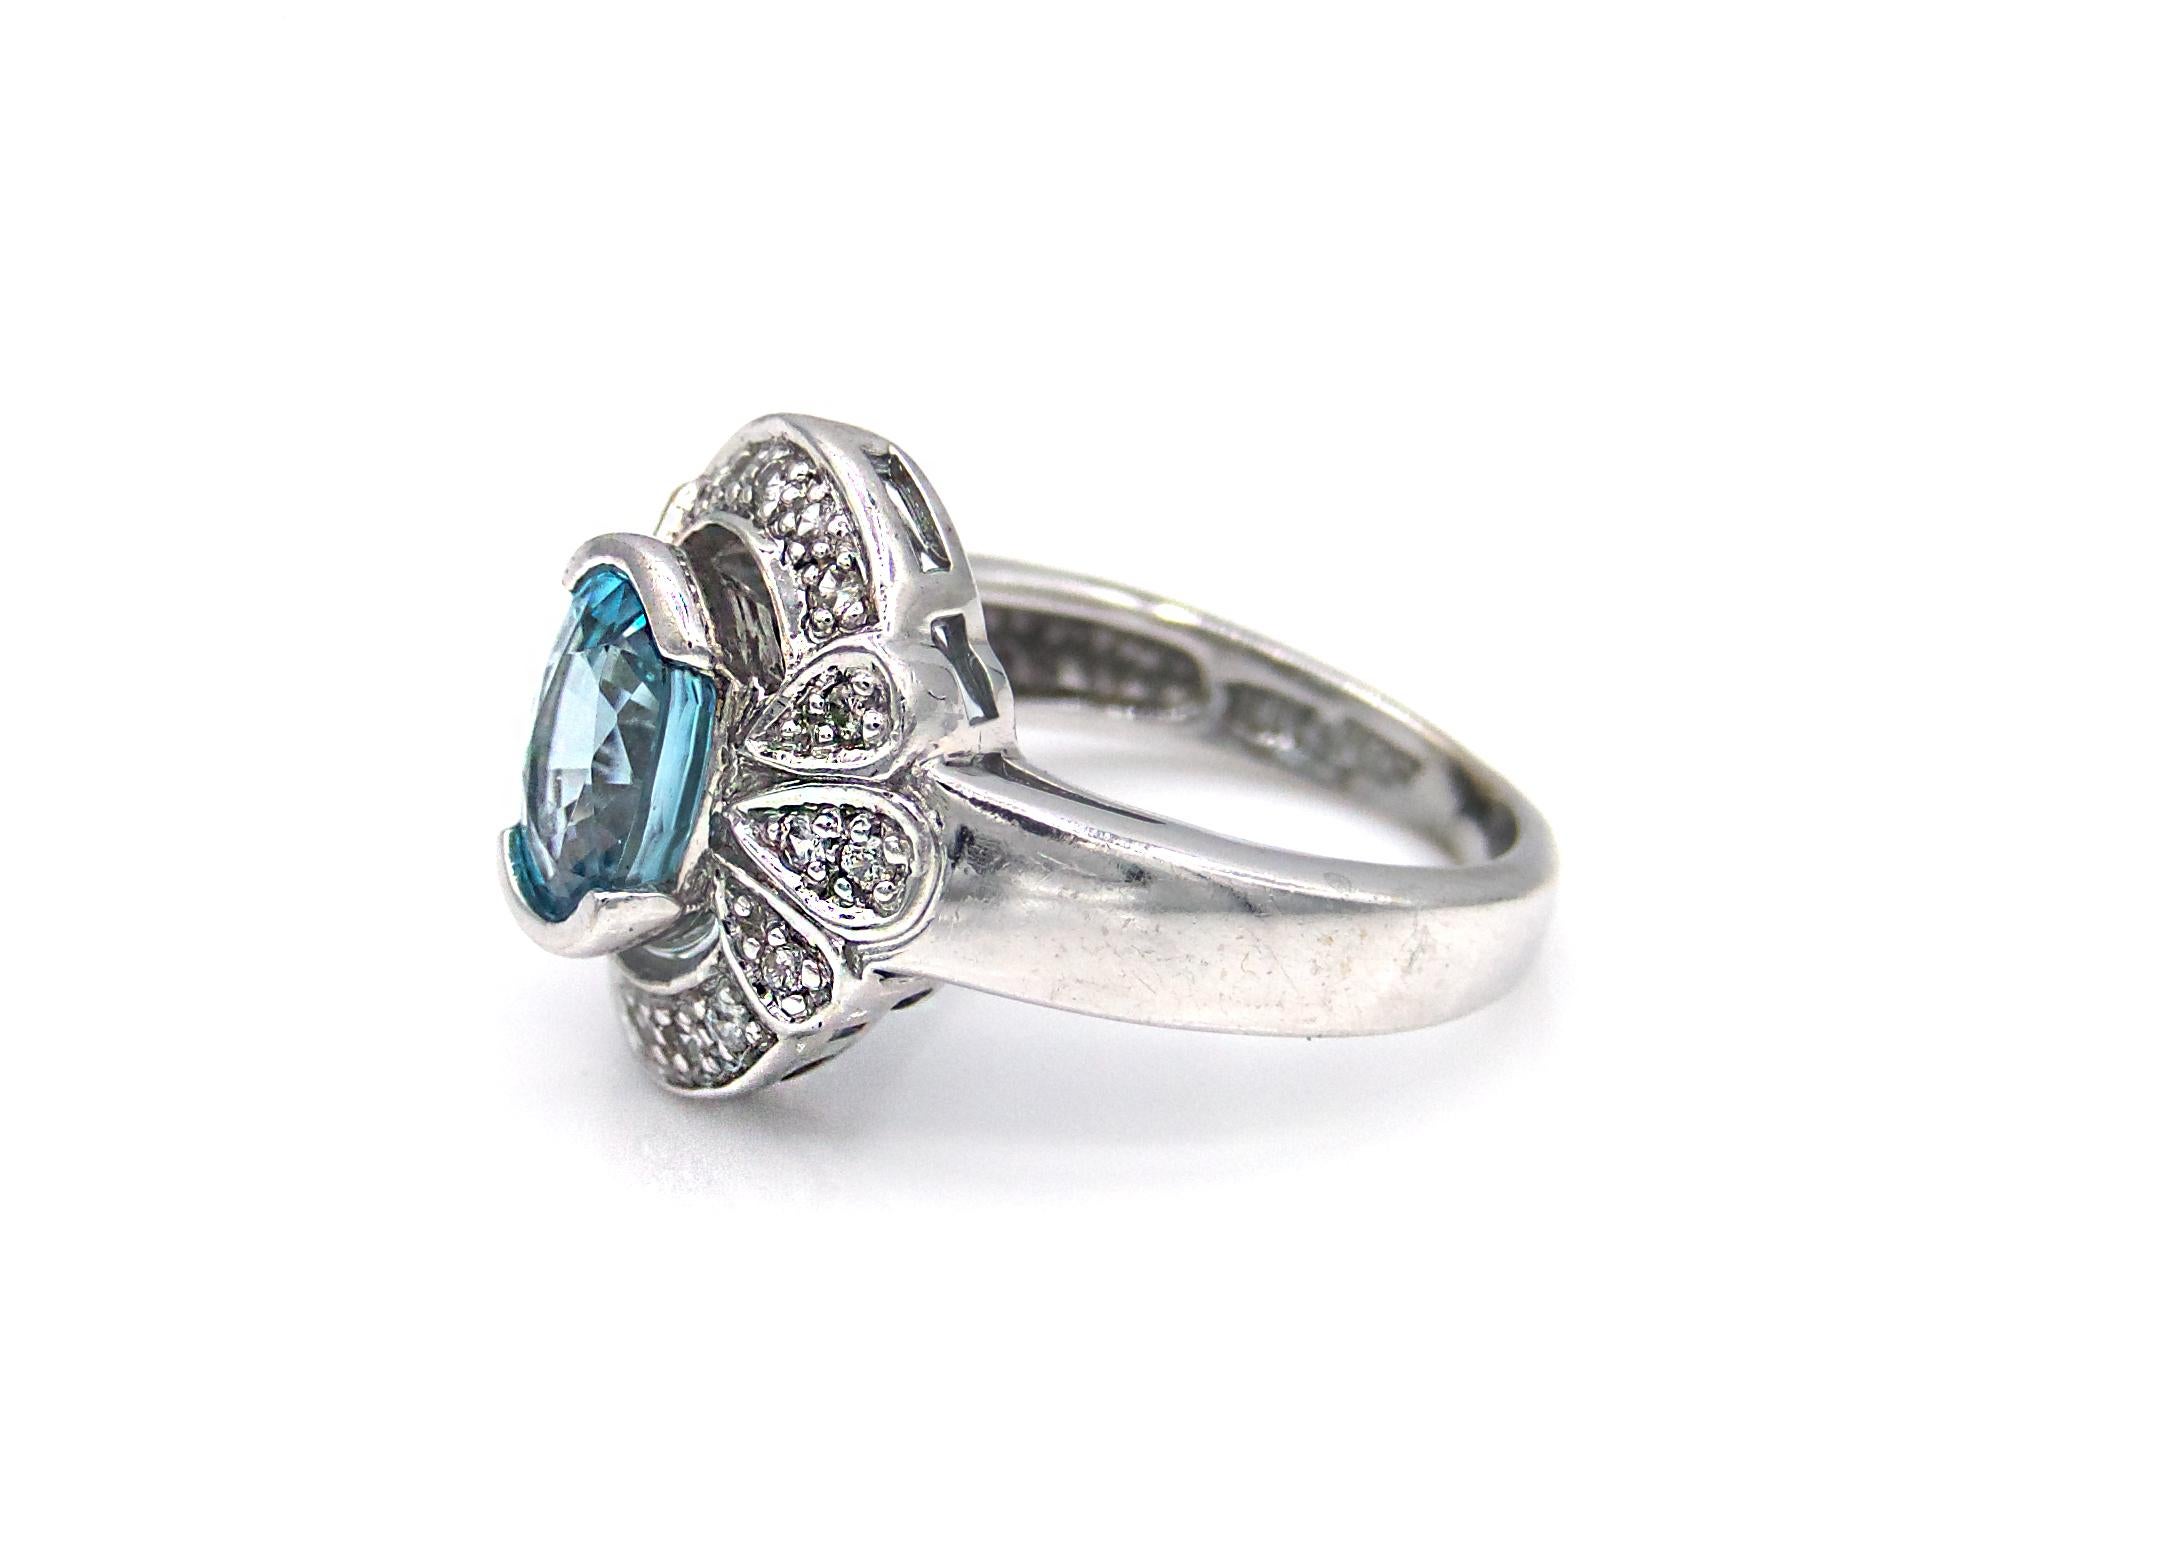 This gorgeous antique-style ring features a 3 Carat oval-cut blue Zircon stone semi bezel set on a 10K White Gold band. The surrounding design is encrusted with numerous glittering pave-cut diamonds. 

5 grams 

Size 5.5 